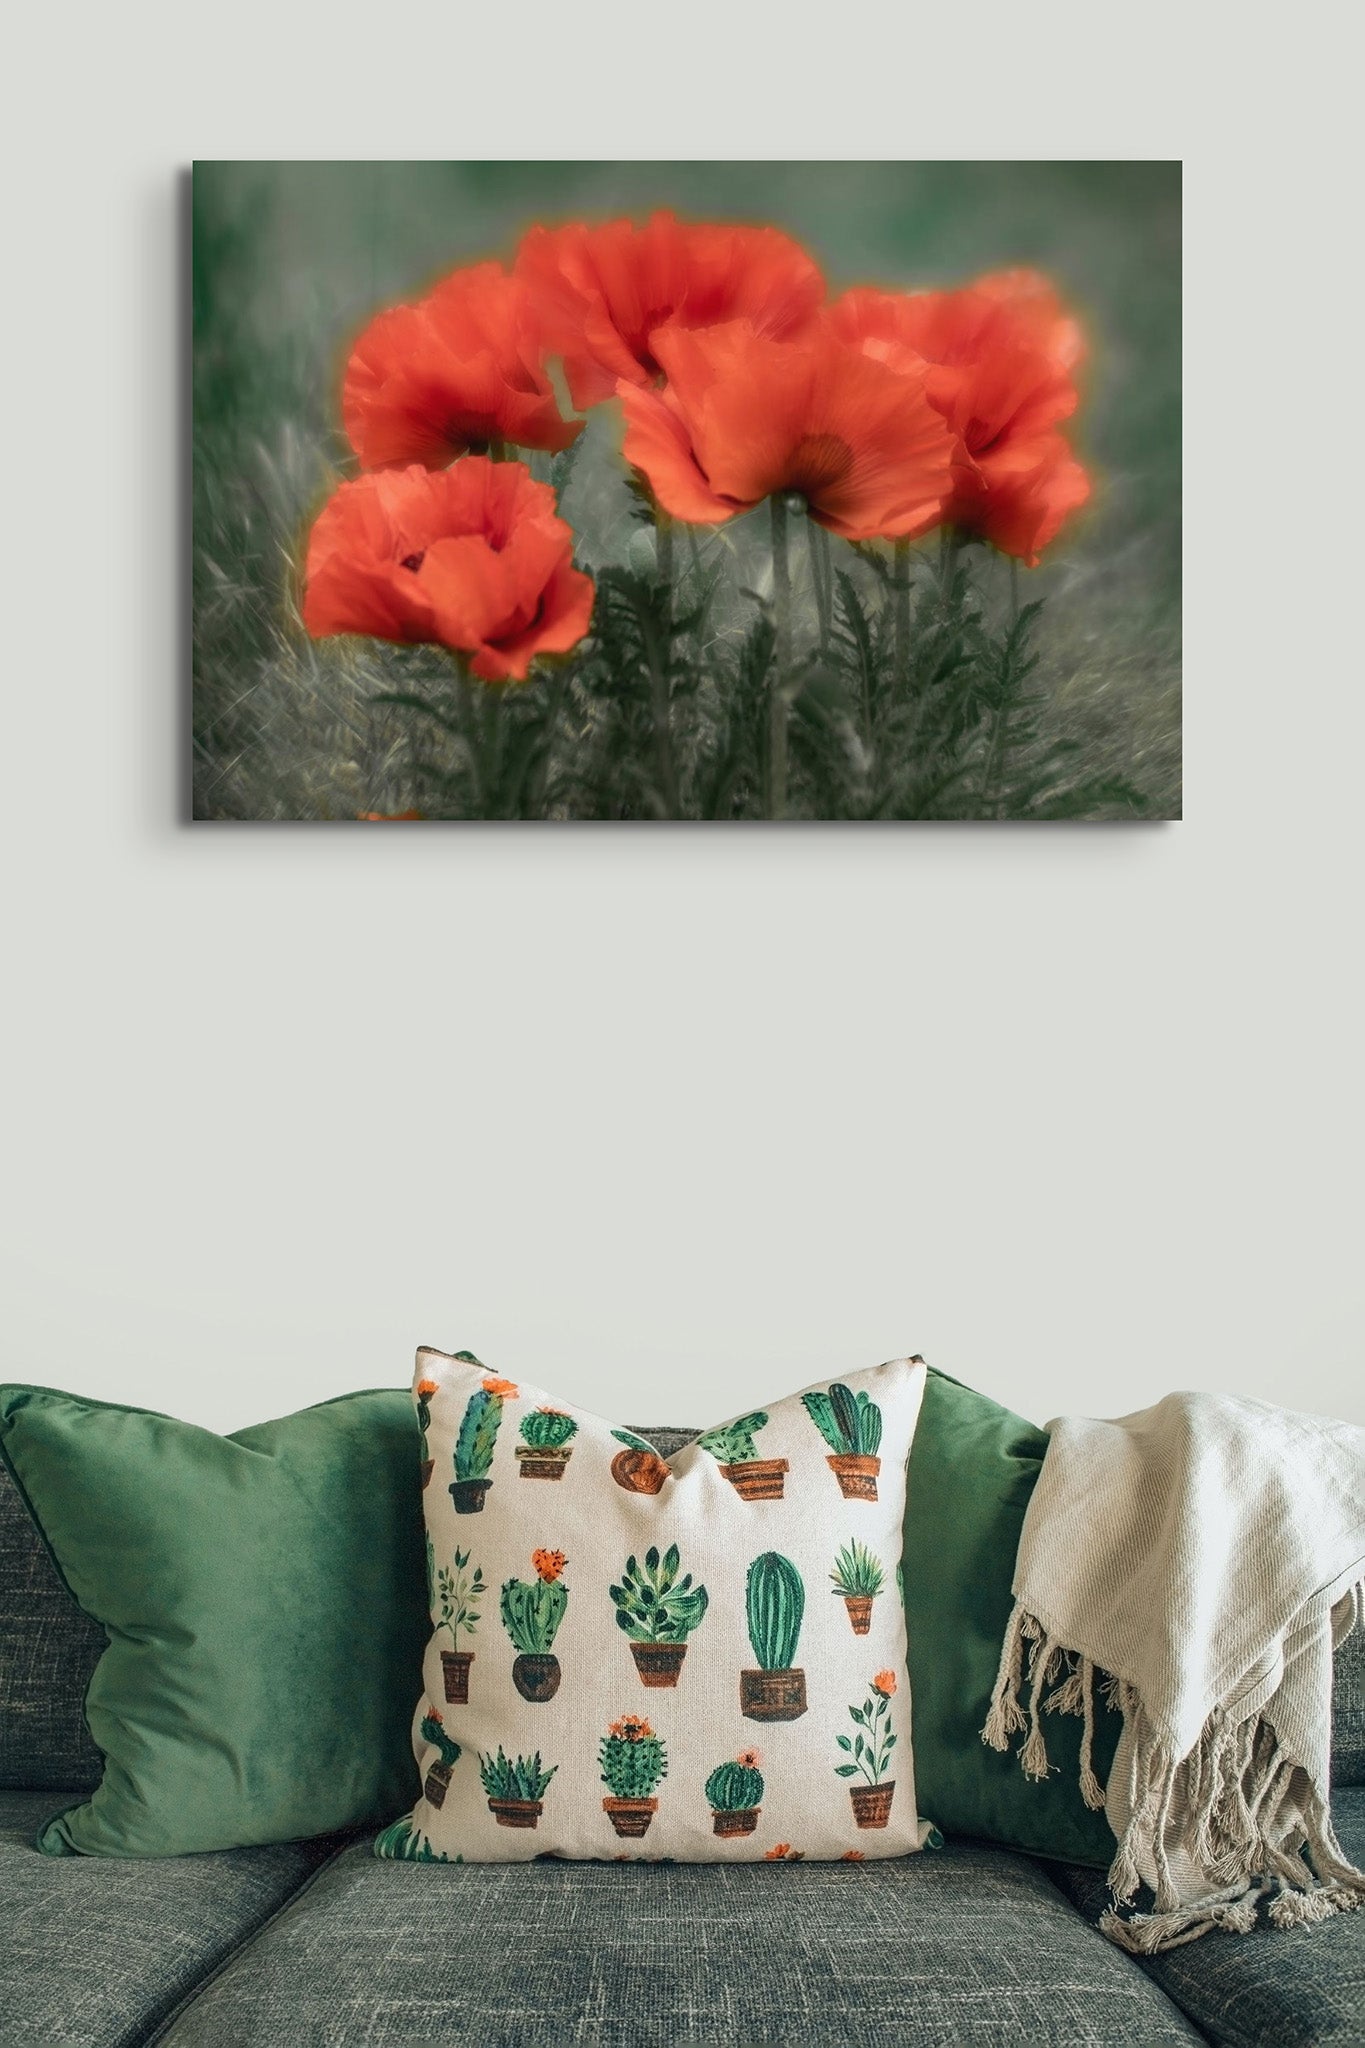 Picture hanging on the wall of a living room. The picture is a photograph of poppy flowers against green background by Cameron Dreaux. 